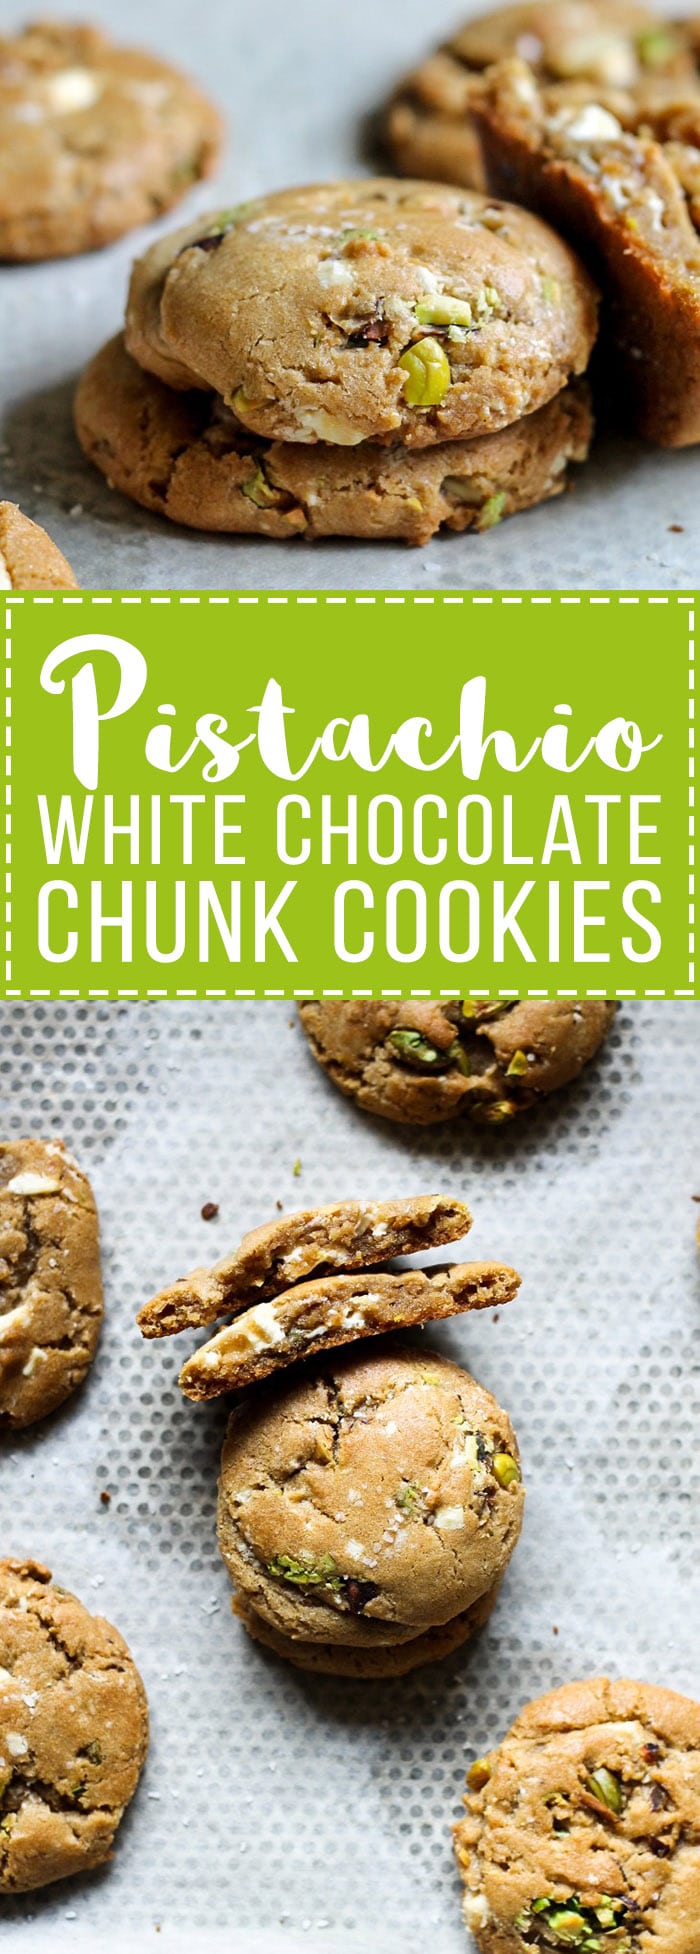 These Pistachio White Chocolate Chunk Cookies are made with a browned butter dough and filled with chopped white chocolate and pistachios. These unique cookies are incredibly delicious!